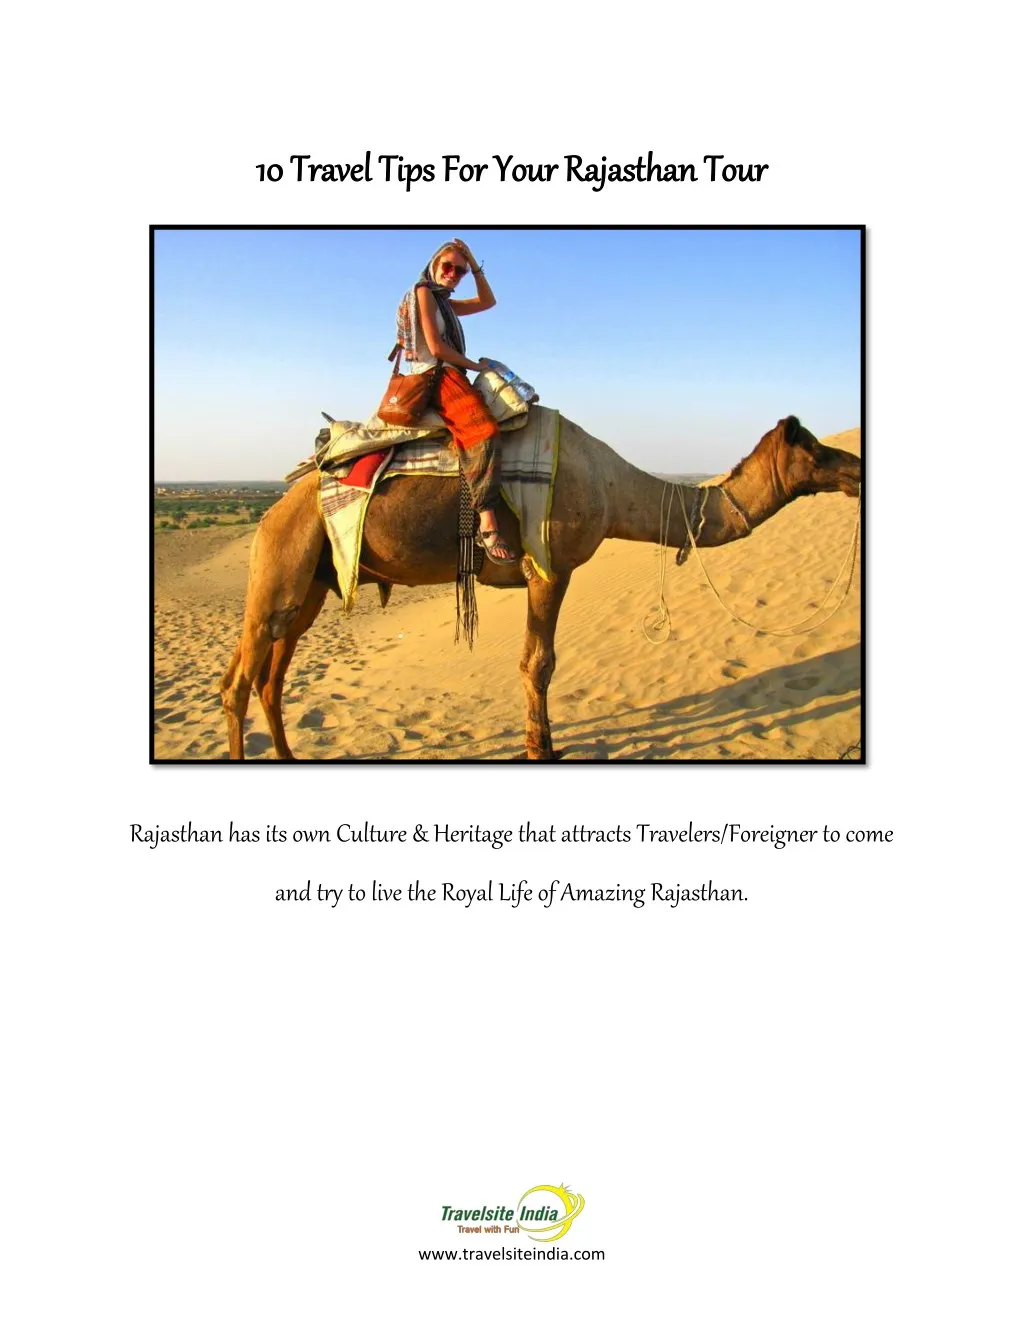 10 travel tips for your rajasthan tour 10 travel